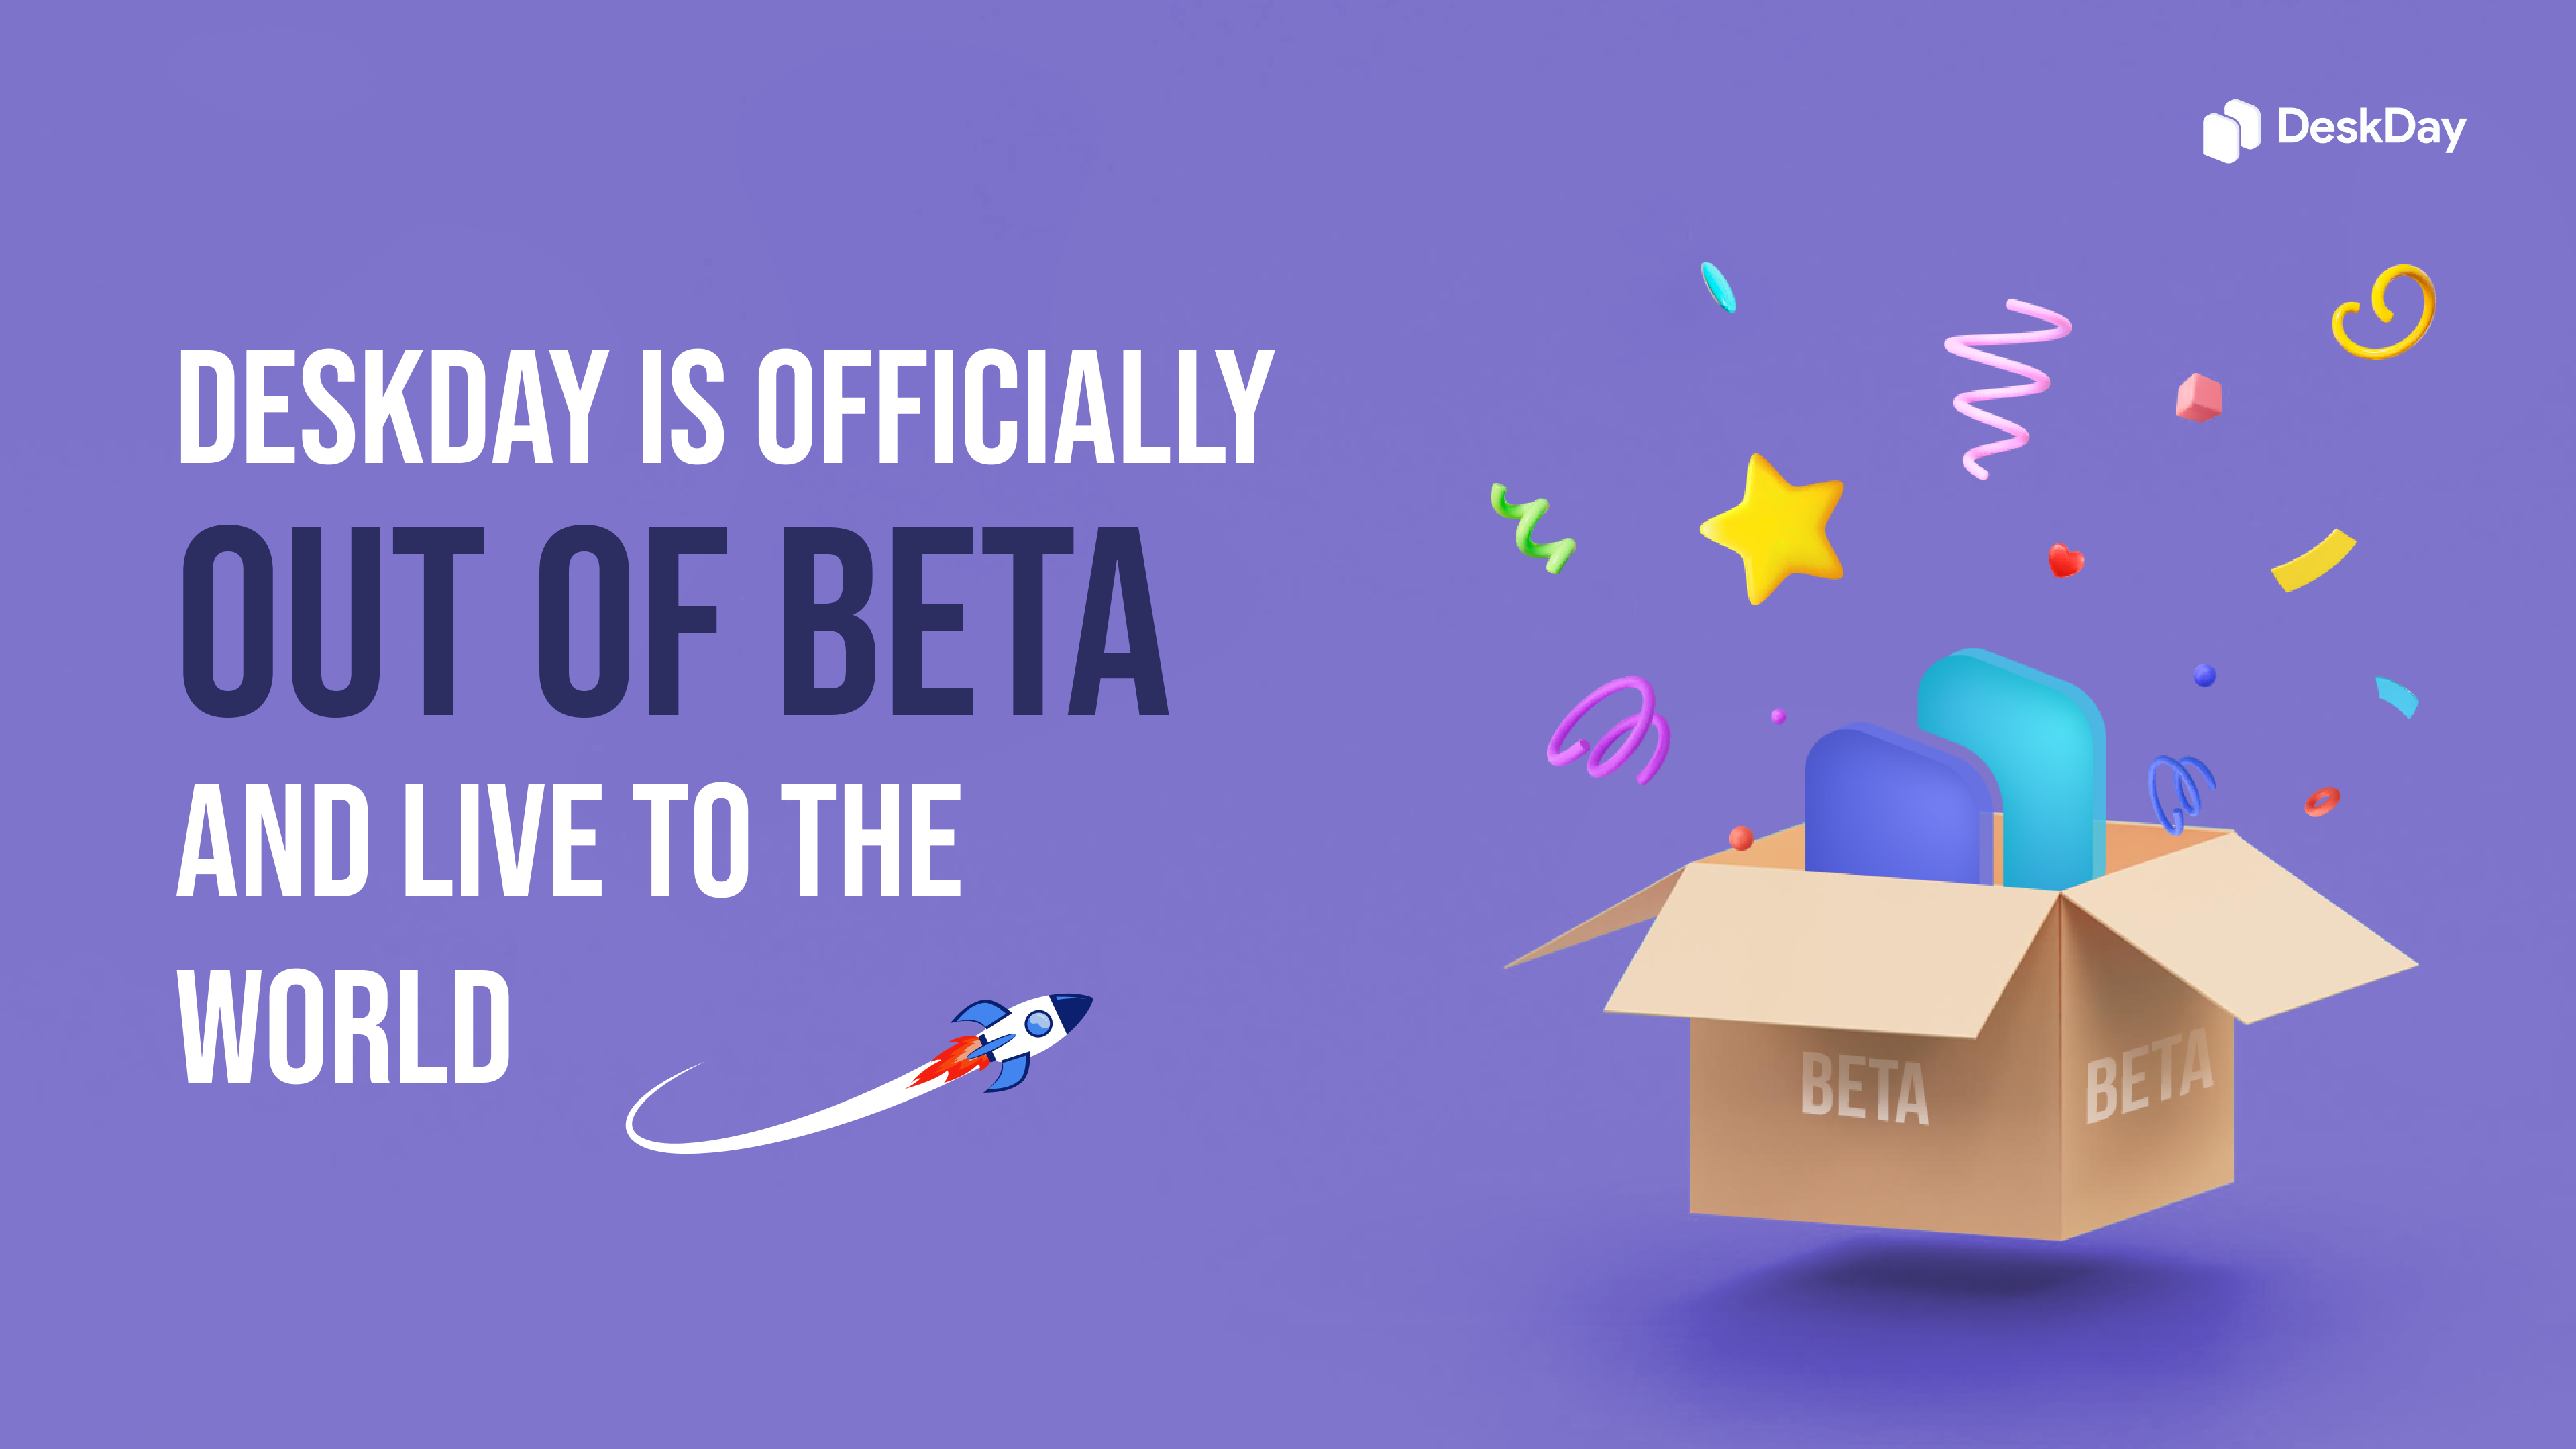 DeskDay is Now Officially Out of Beta – Thank You for Being Part of Our Journey!